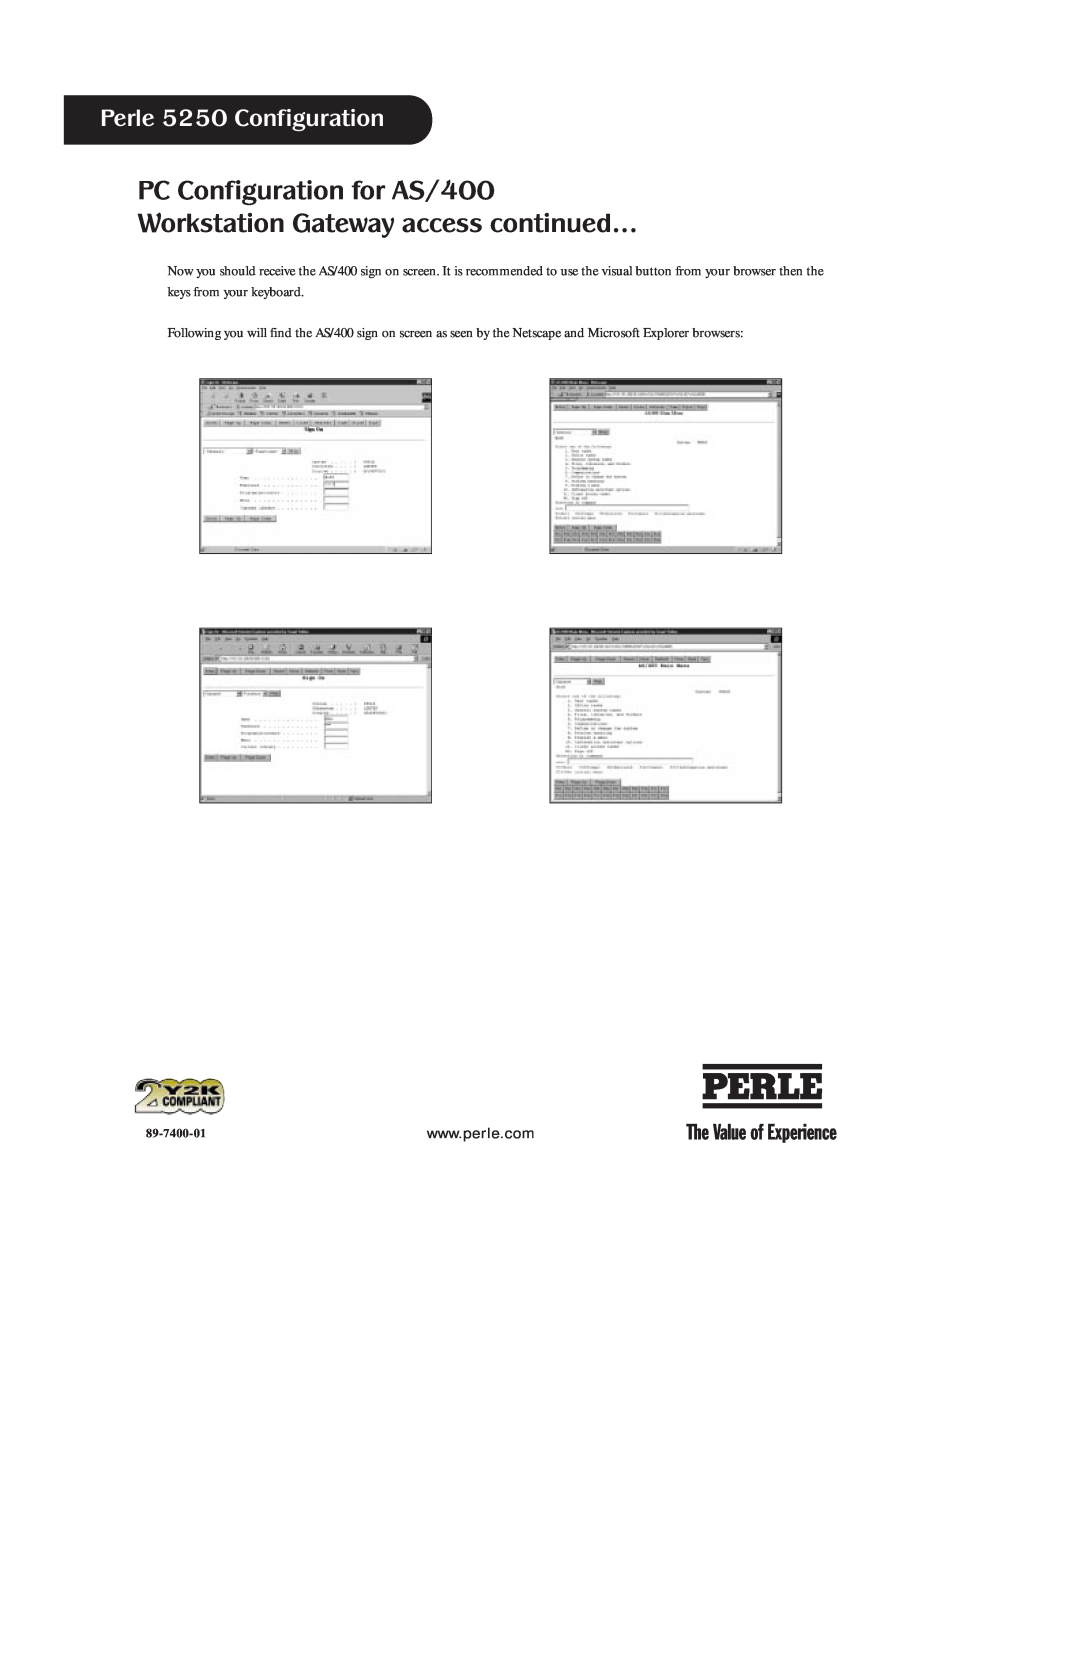 Perle Systems manual PC Configuration for AS/400 Workstation Gateway access continued, Perle 5250 Configuration 